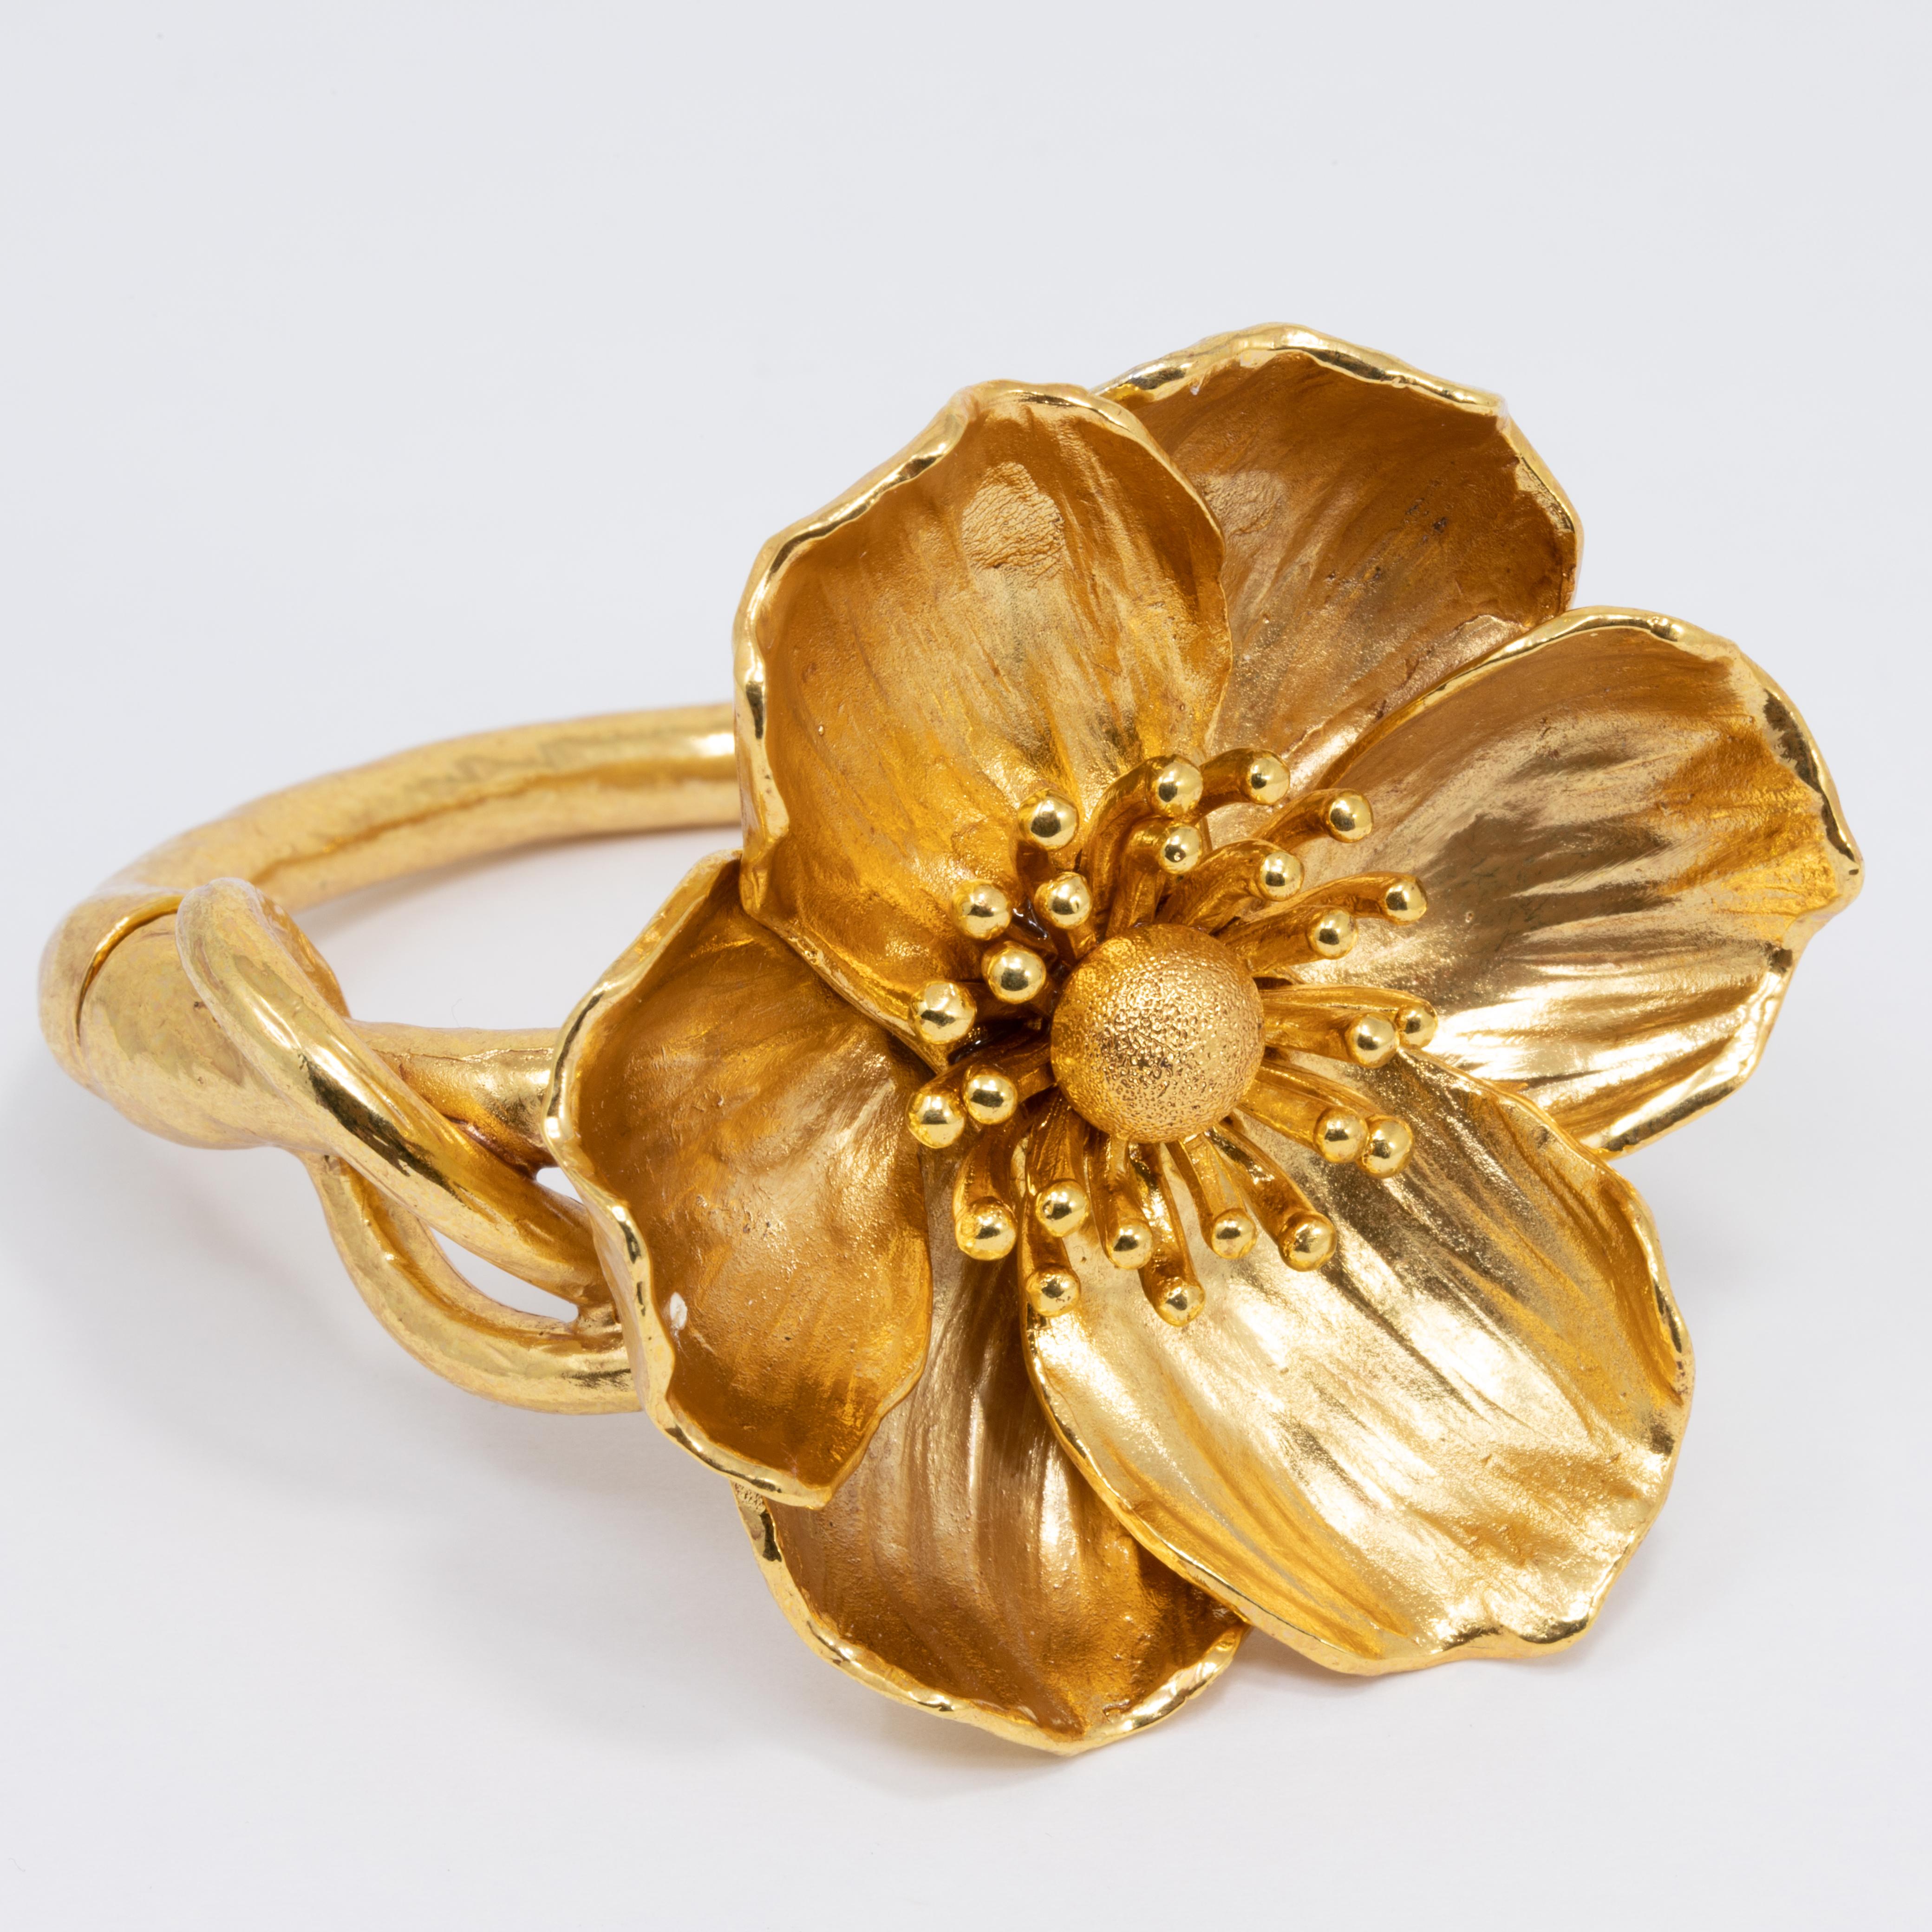 Poppy flower bracelet by Oscar de la Renta. Gold-plated pewter hardware with magnetic closure. Poppy silhouette with brushed finish. Approx. 2.5